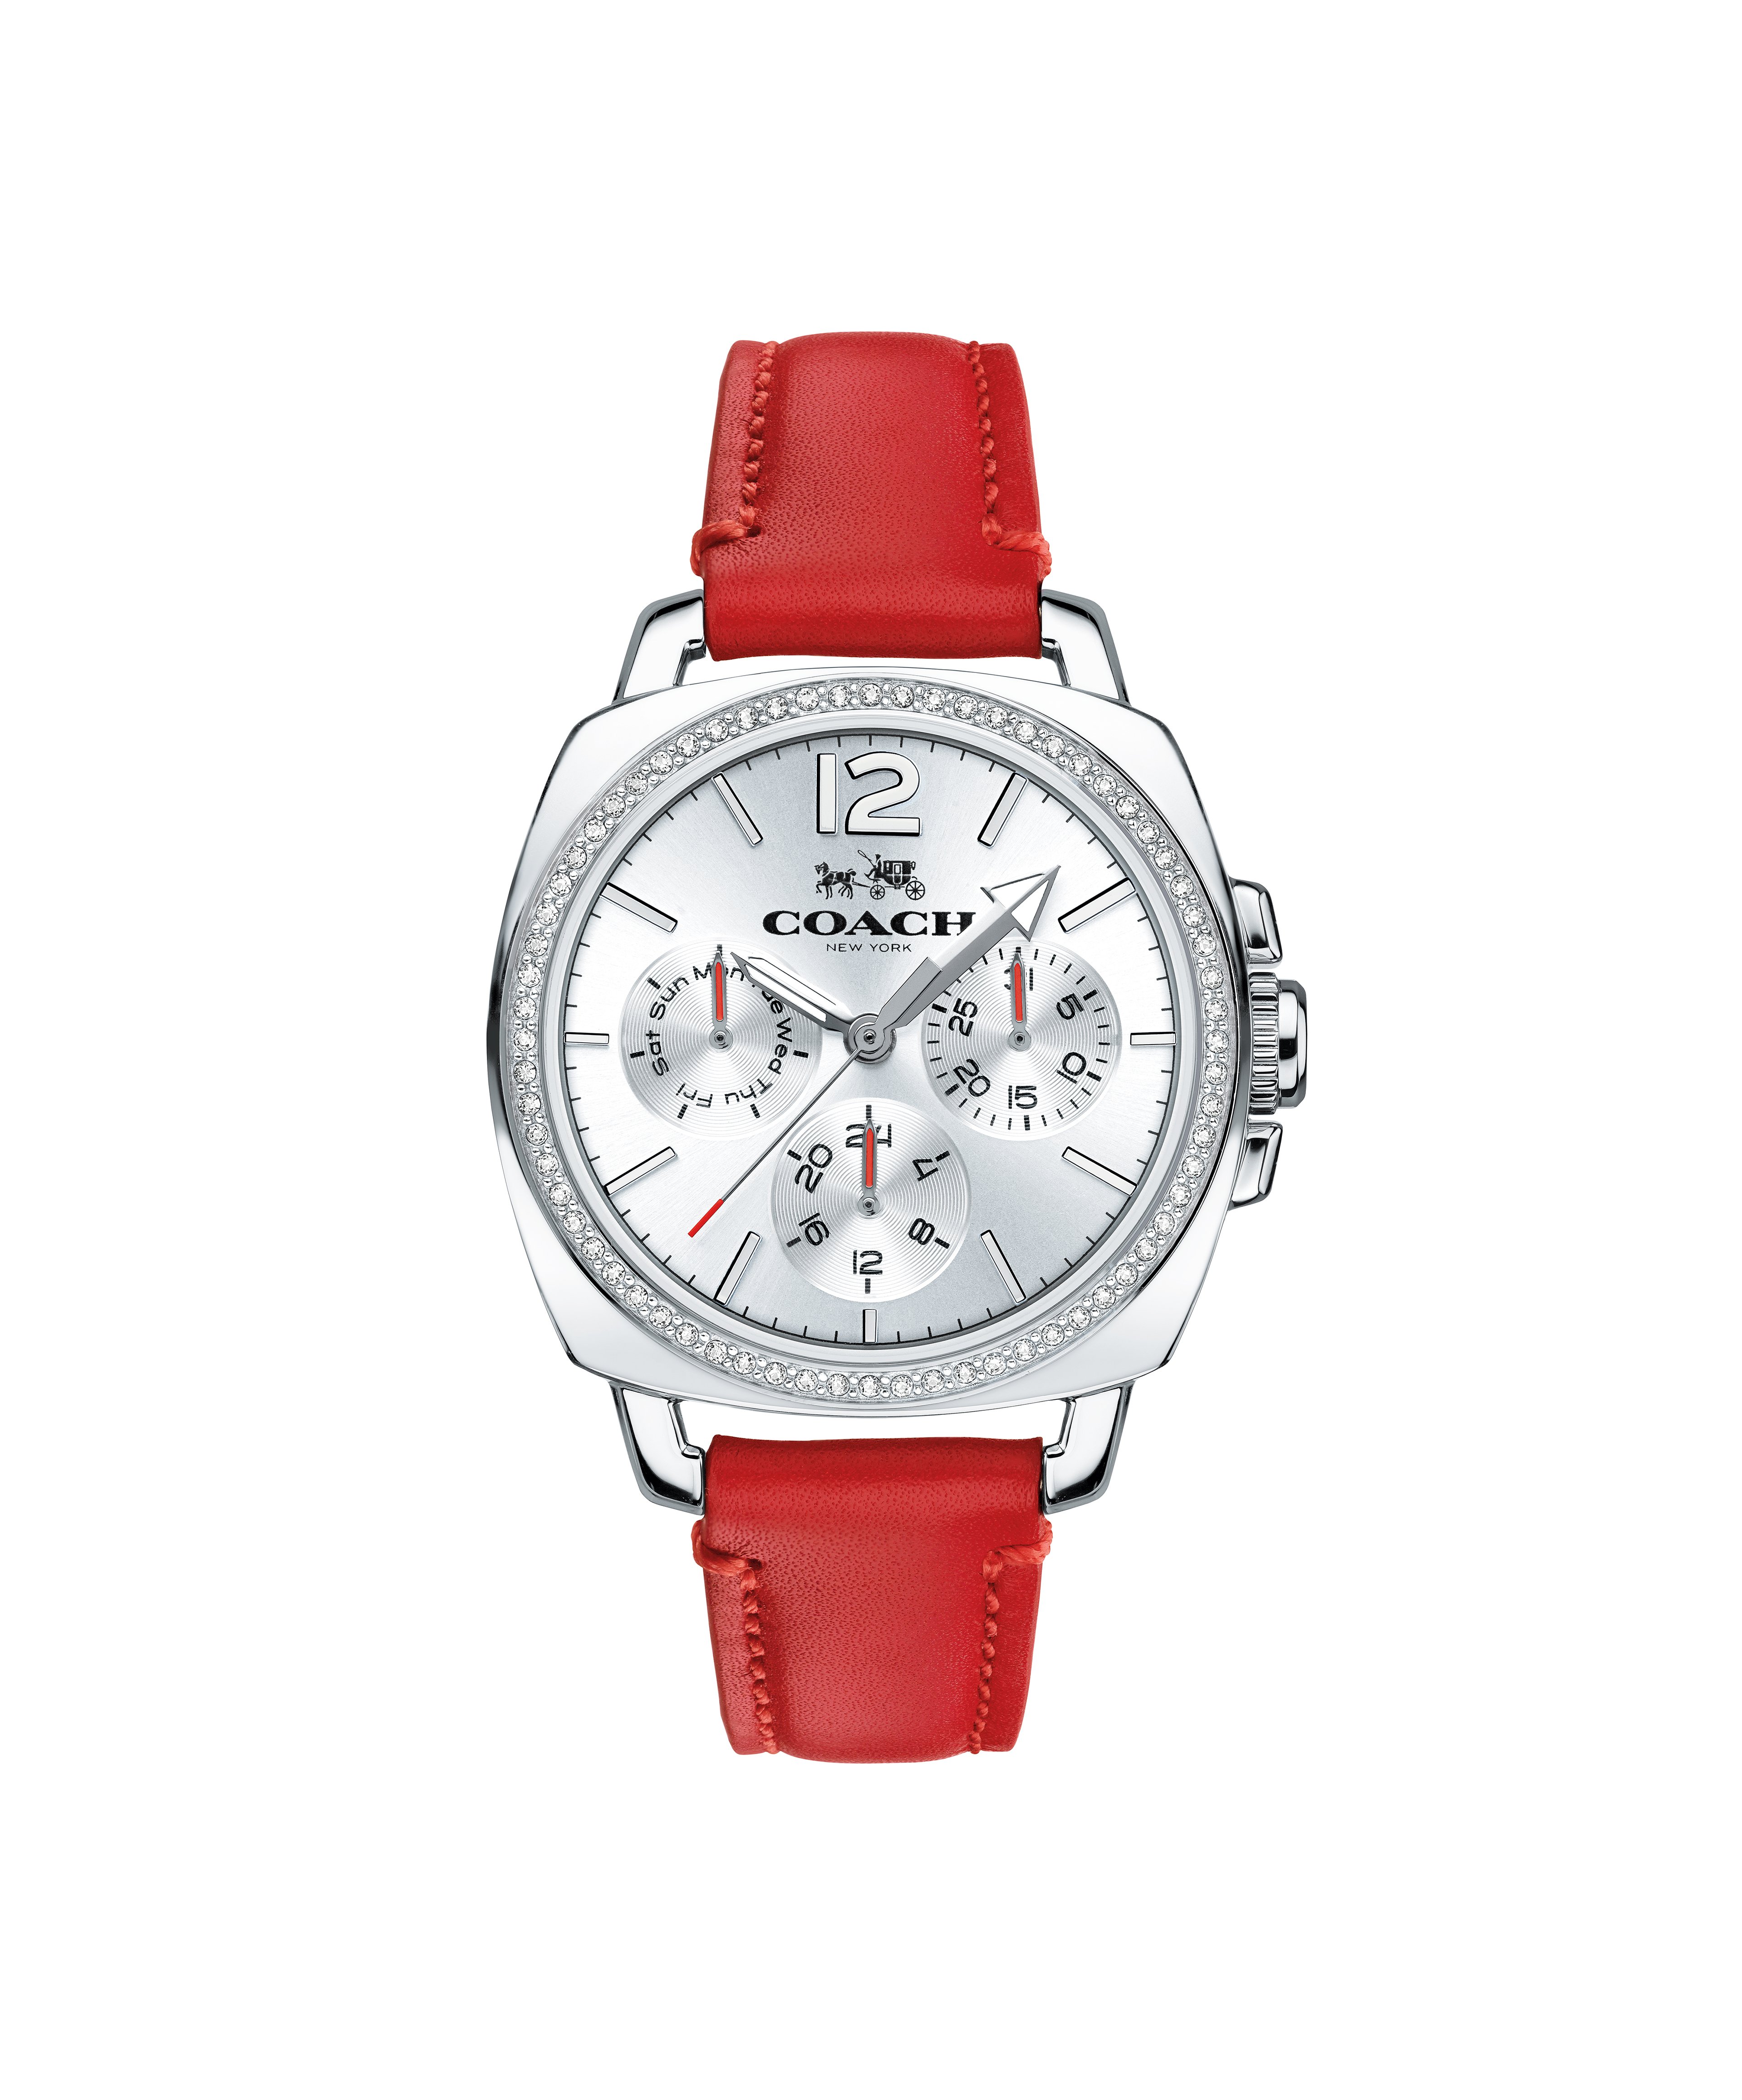 Coach | Movado Company Store| Boyfriend 34mm Red Leather Strap Women's Watch  With Silver Dial